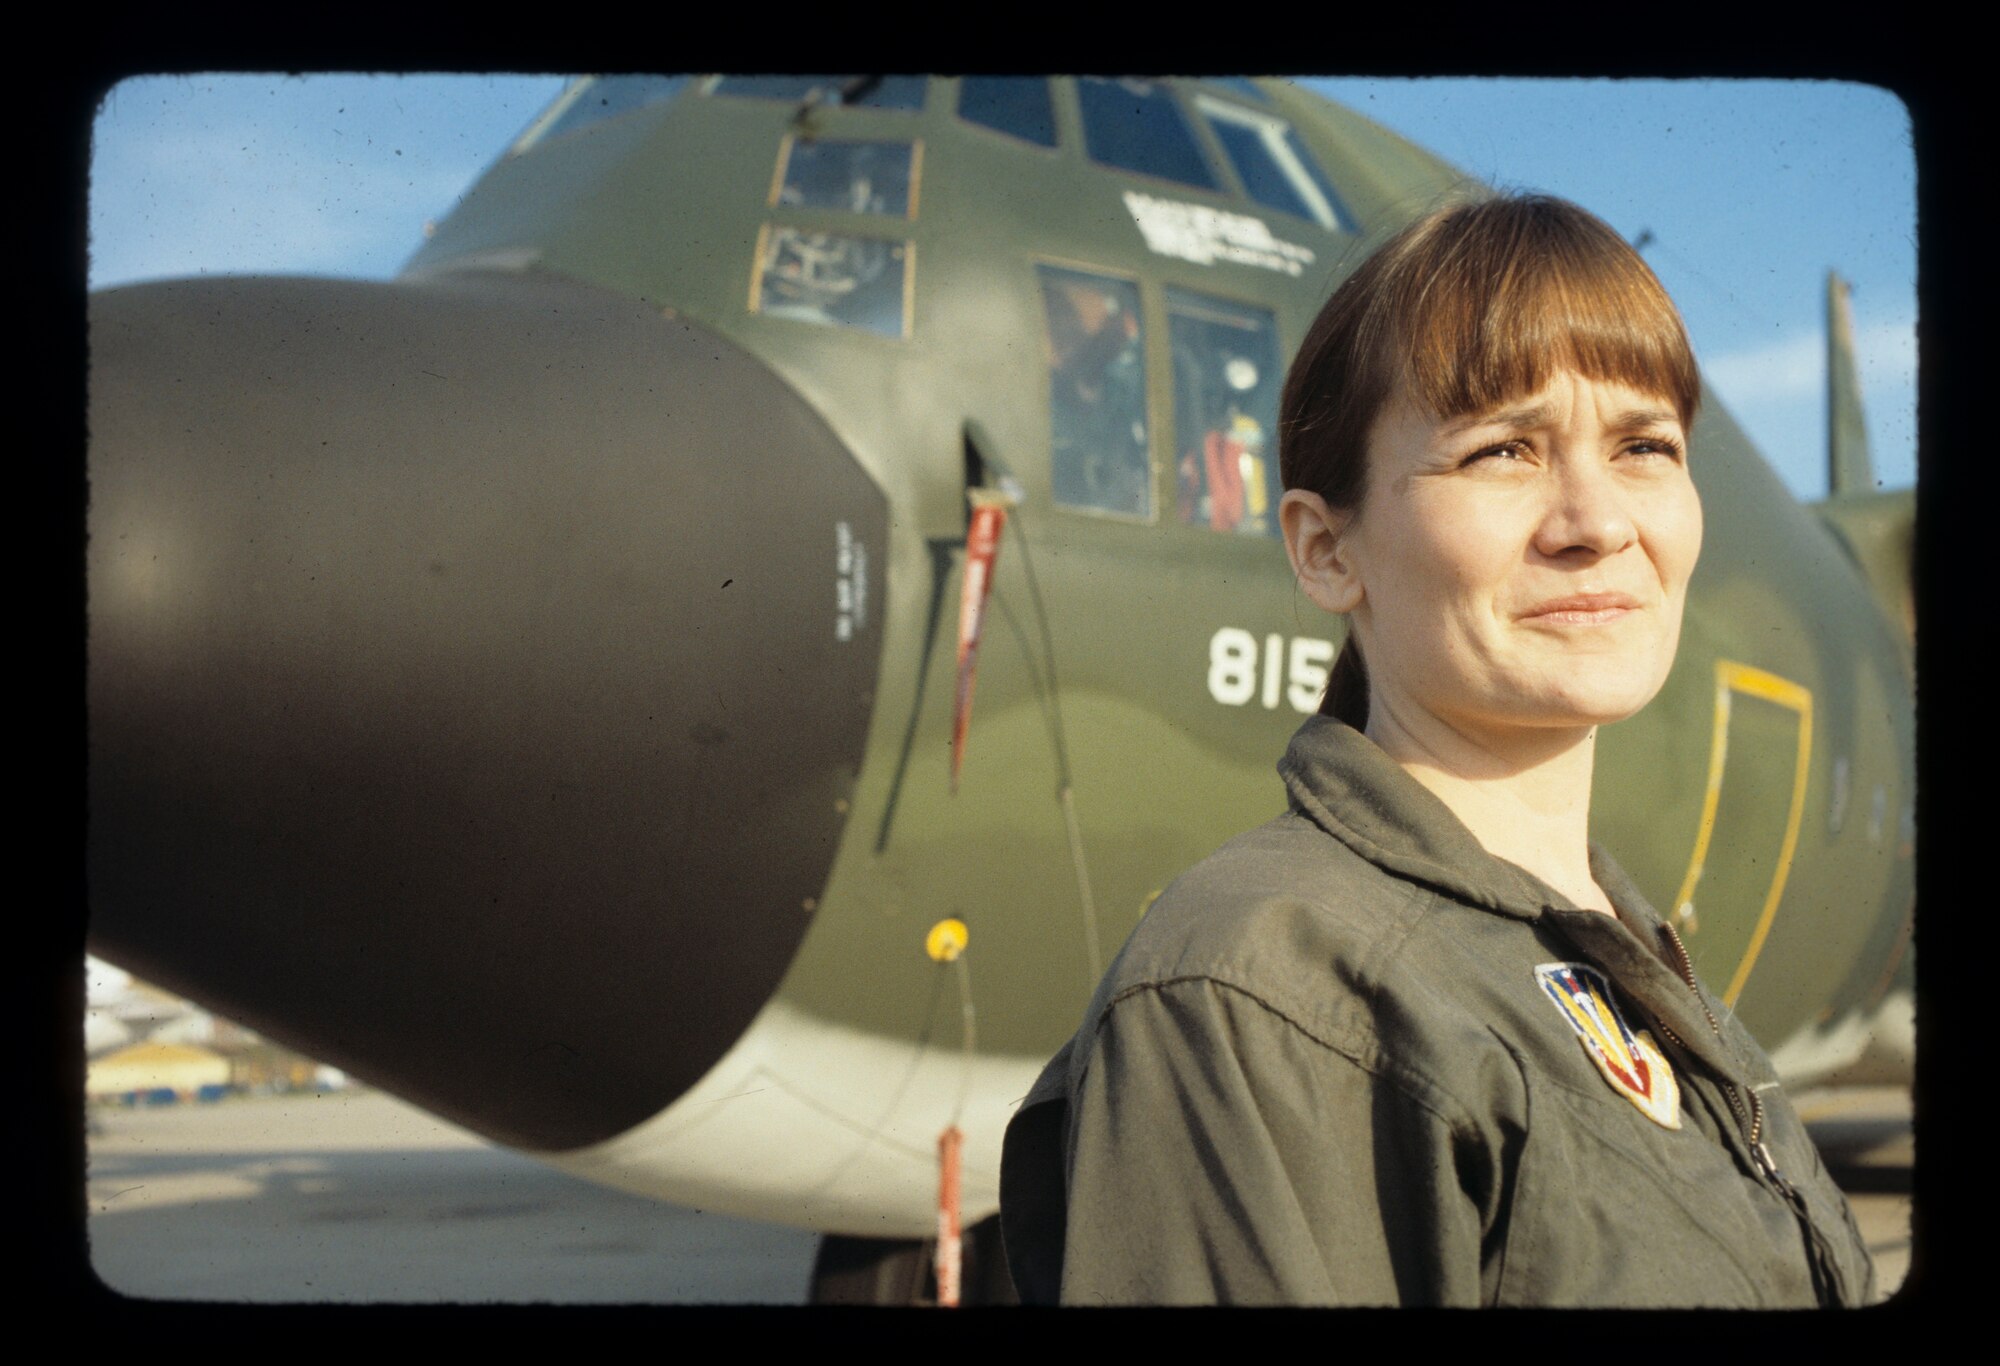 Remembering our past - Pictured here in 1979 is Linda Hall, the first female air crew member on an EC-130E aircraft for the 193rd Tactical Electronic Warfare Group. Hall joined the 193rd in December 1977 and retired in 1997.